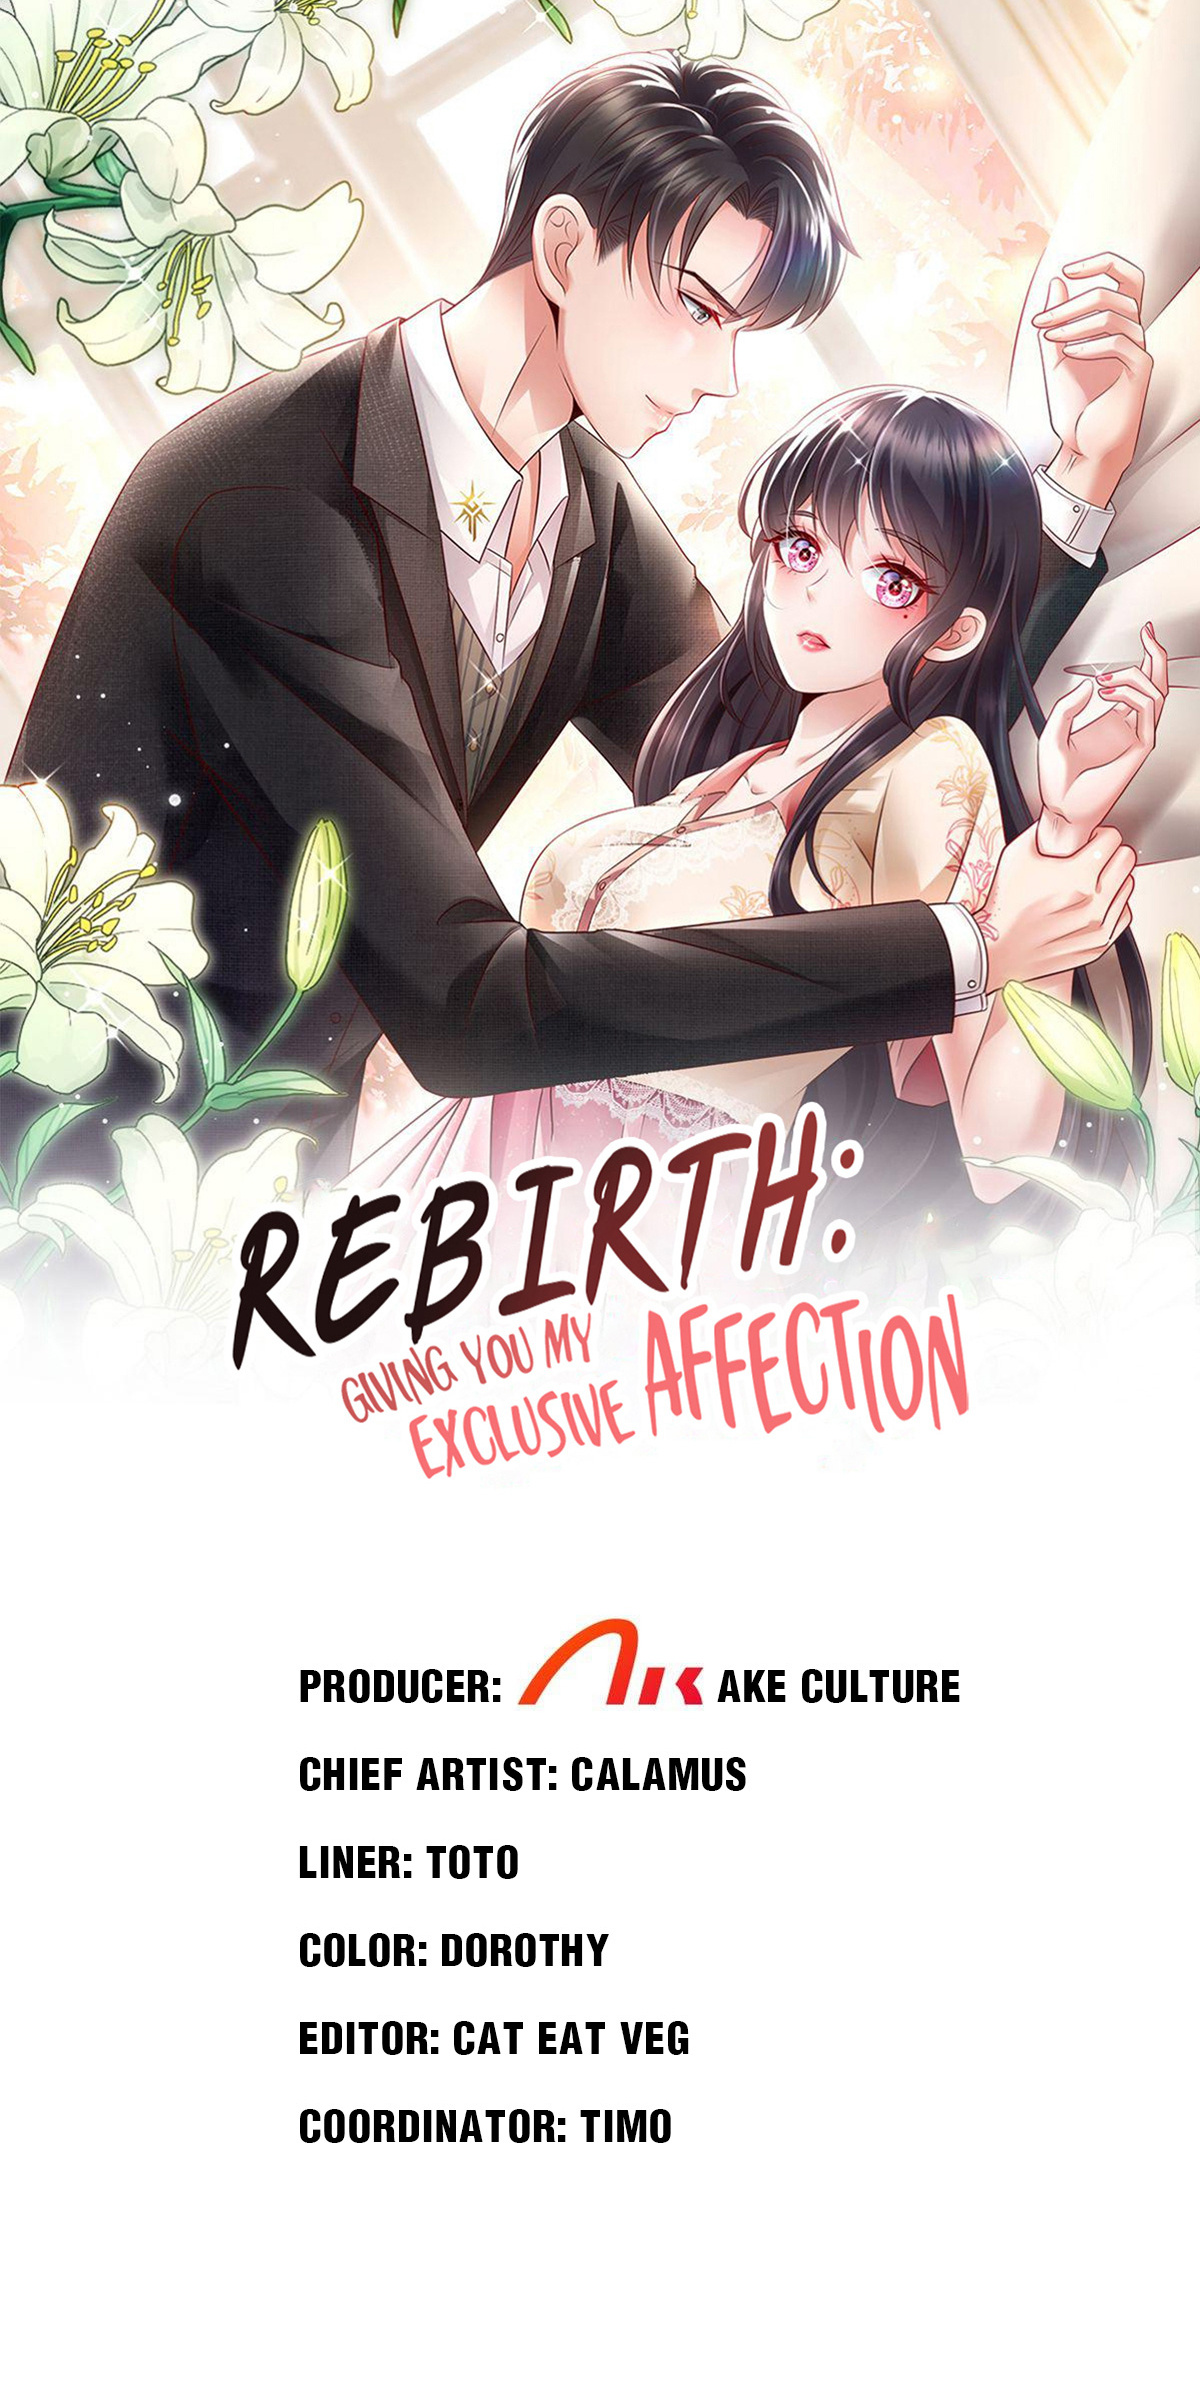 Rebirth: Giving You My Exclusive Affection 246